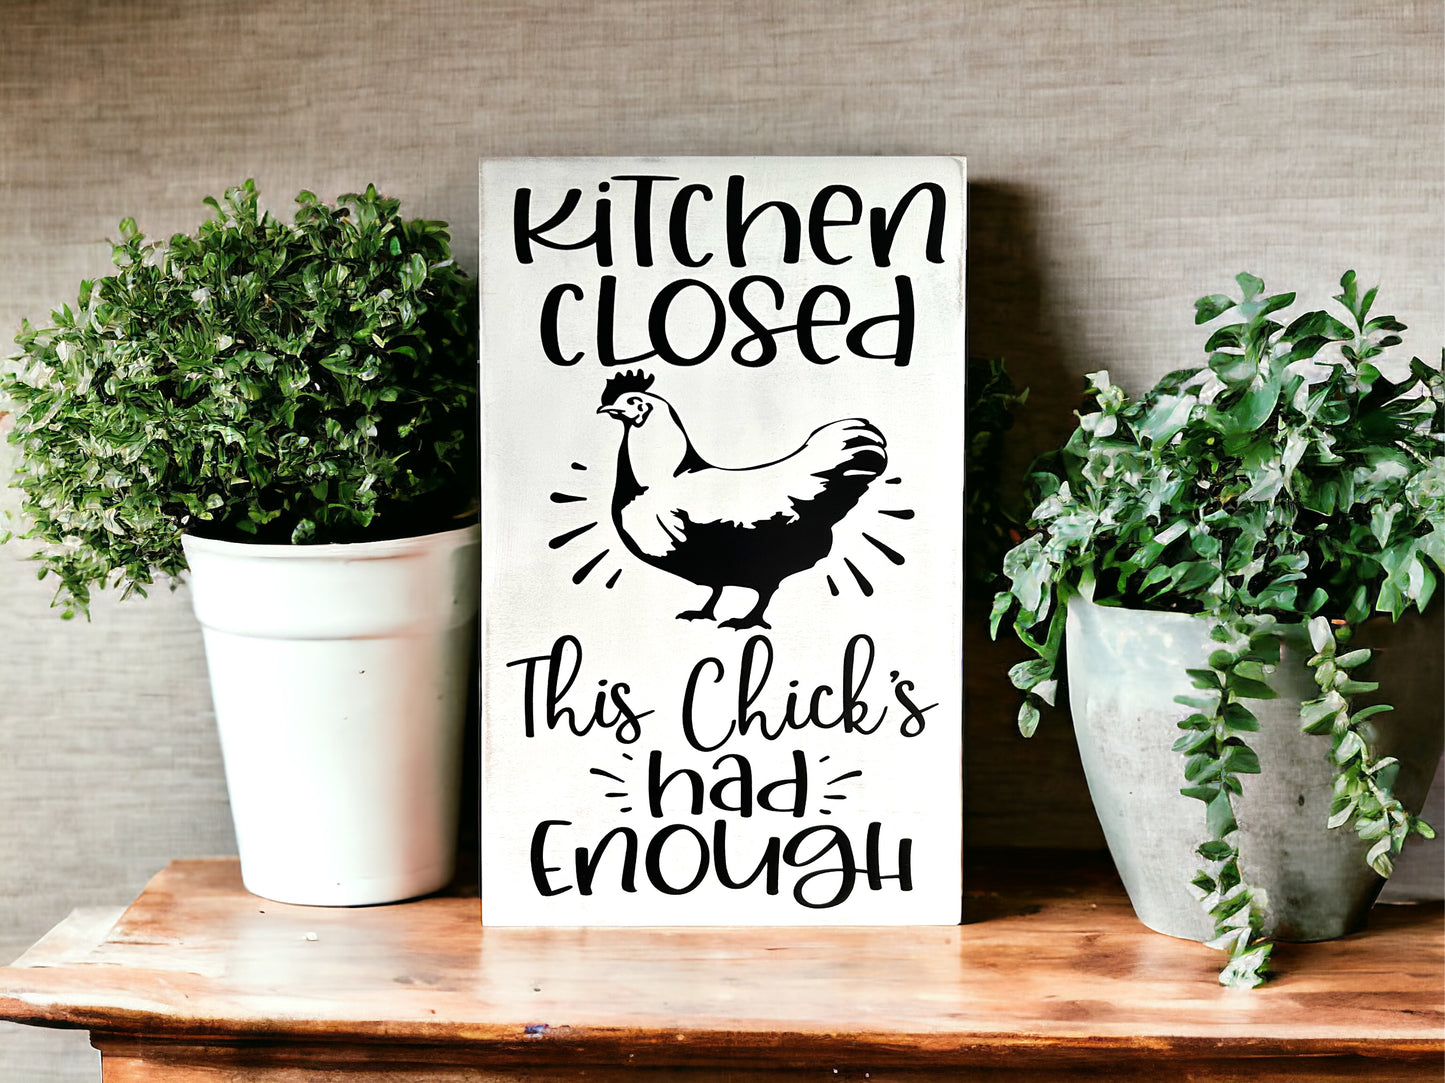 Kitchen Closed, This Chick's Had Enough - Funny Wood Sign